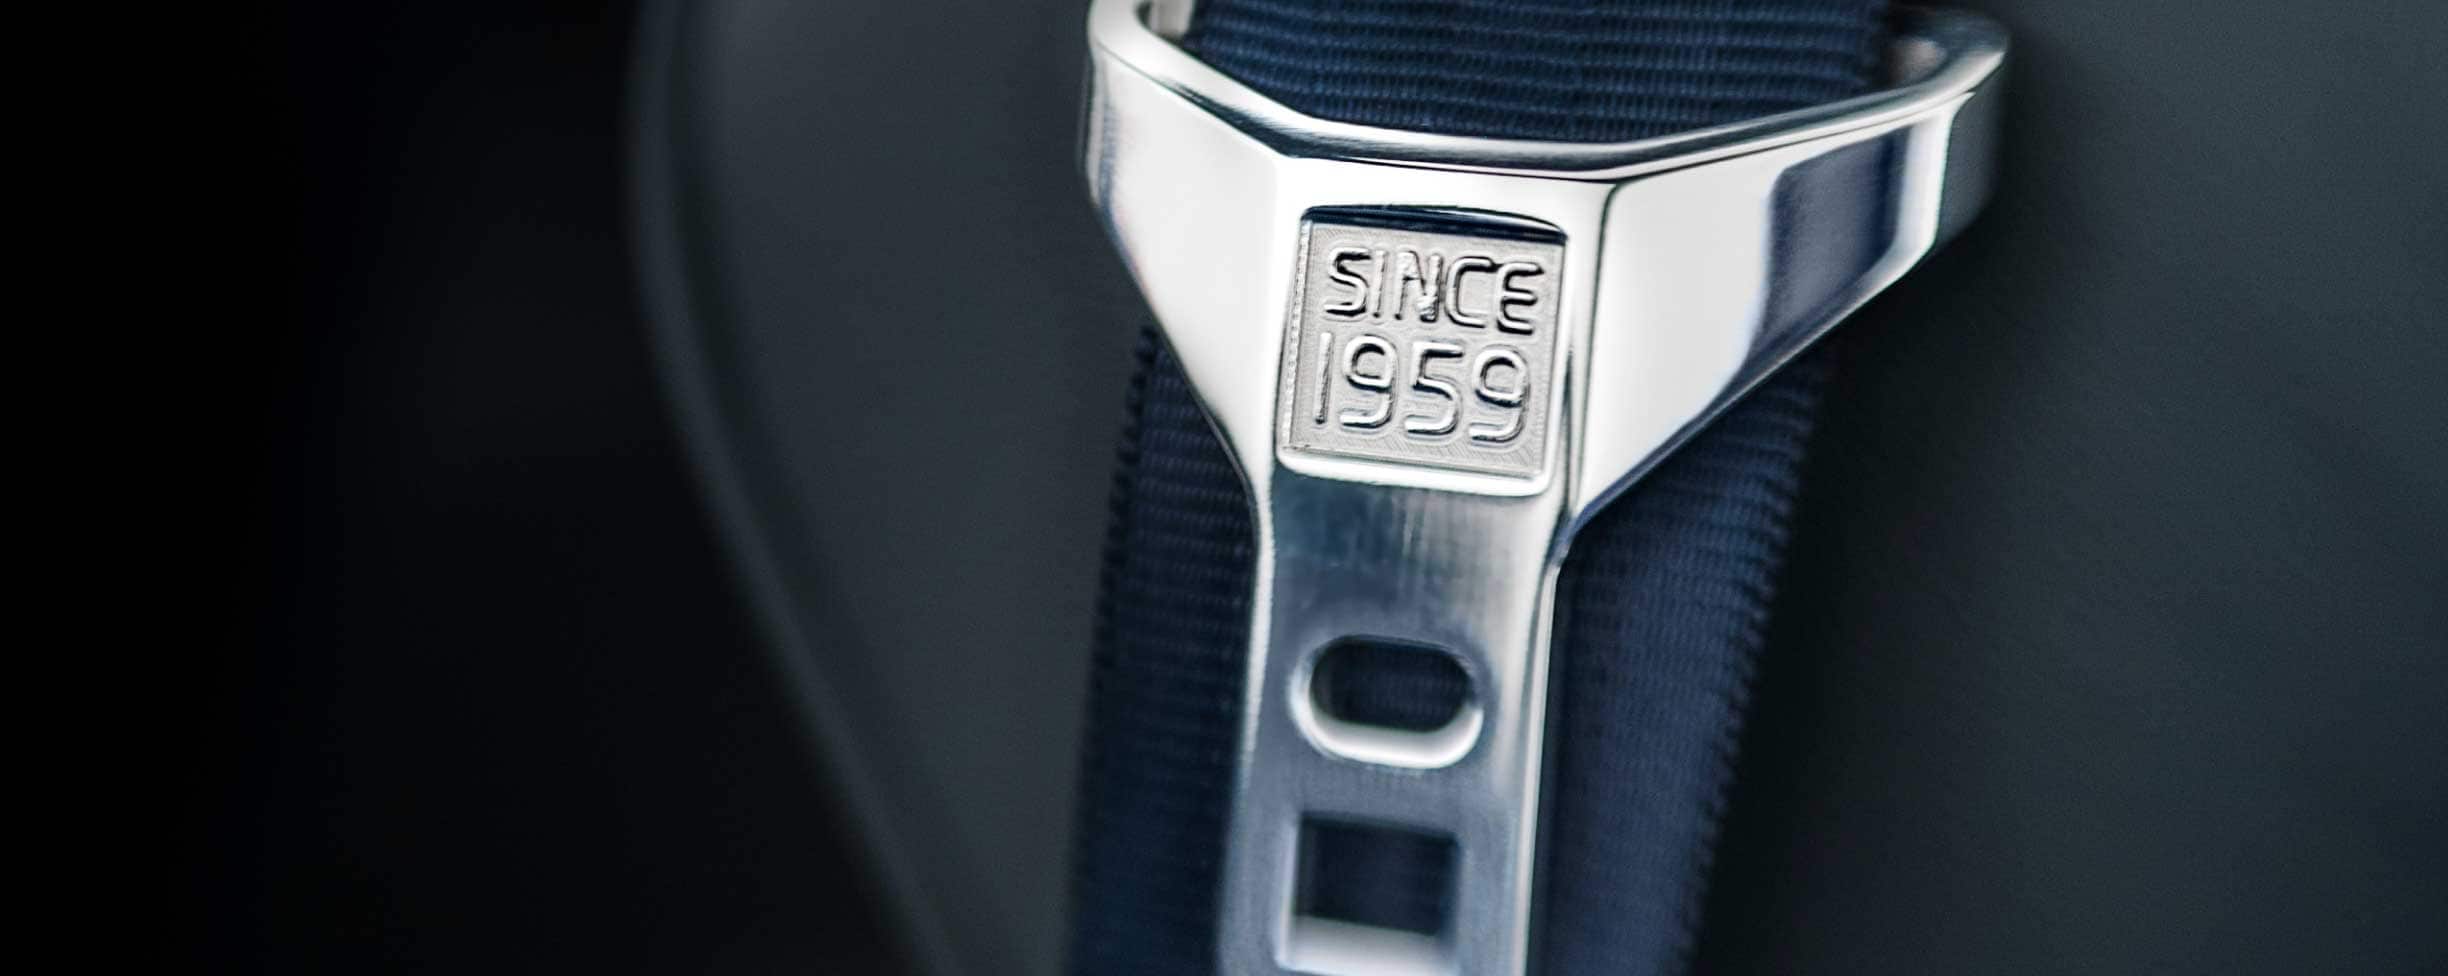 A safety belt in grey with the text "Since 1959" engraved on the buckle.